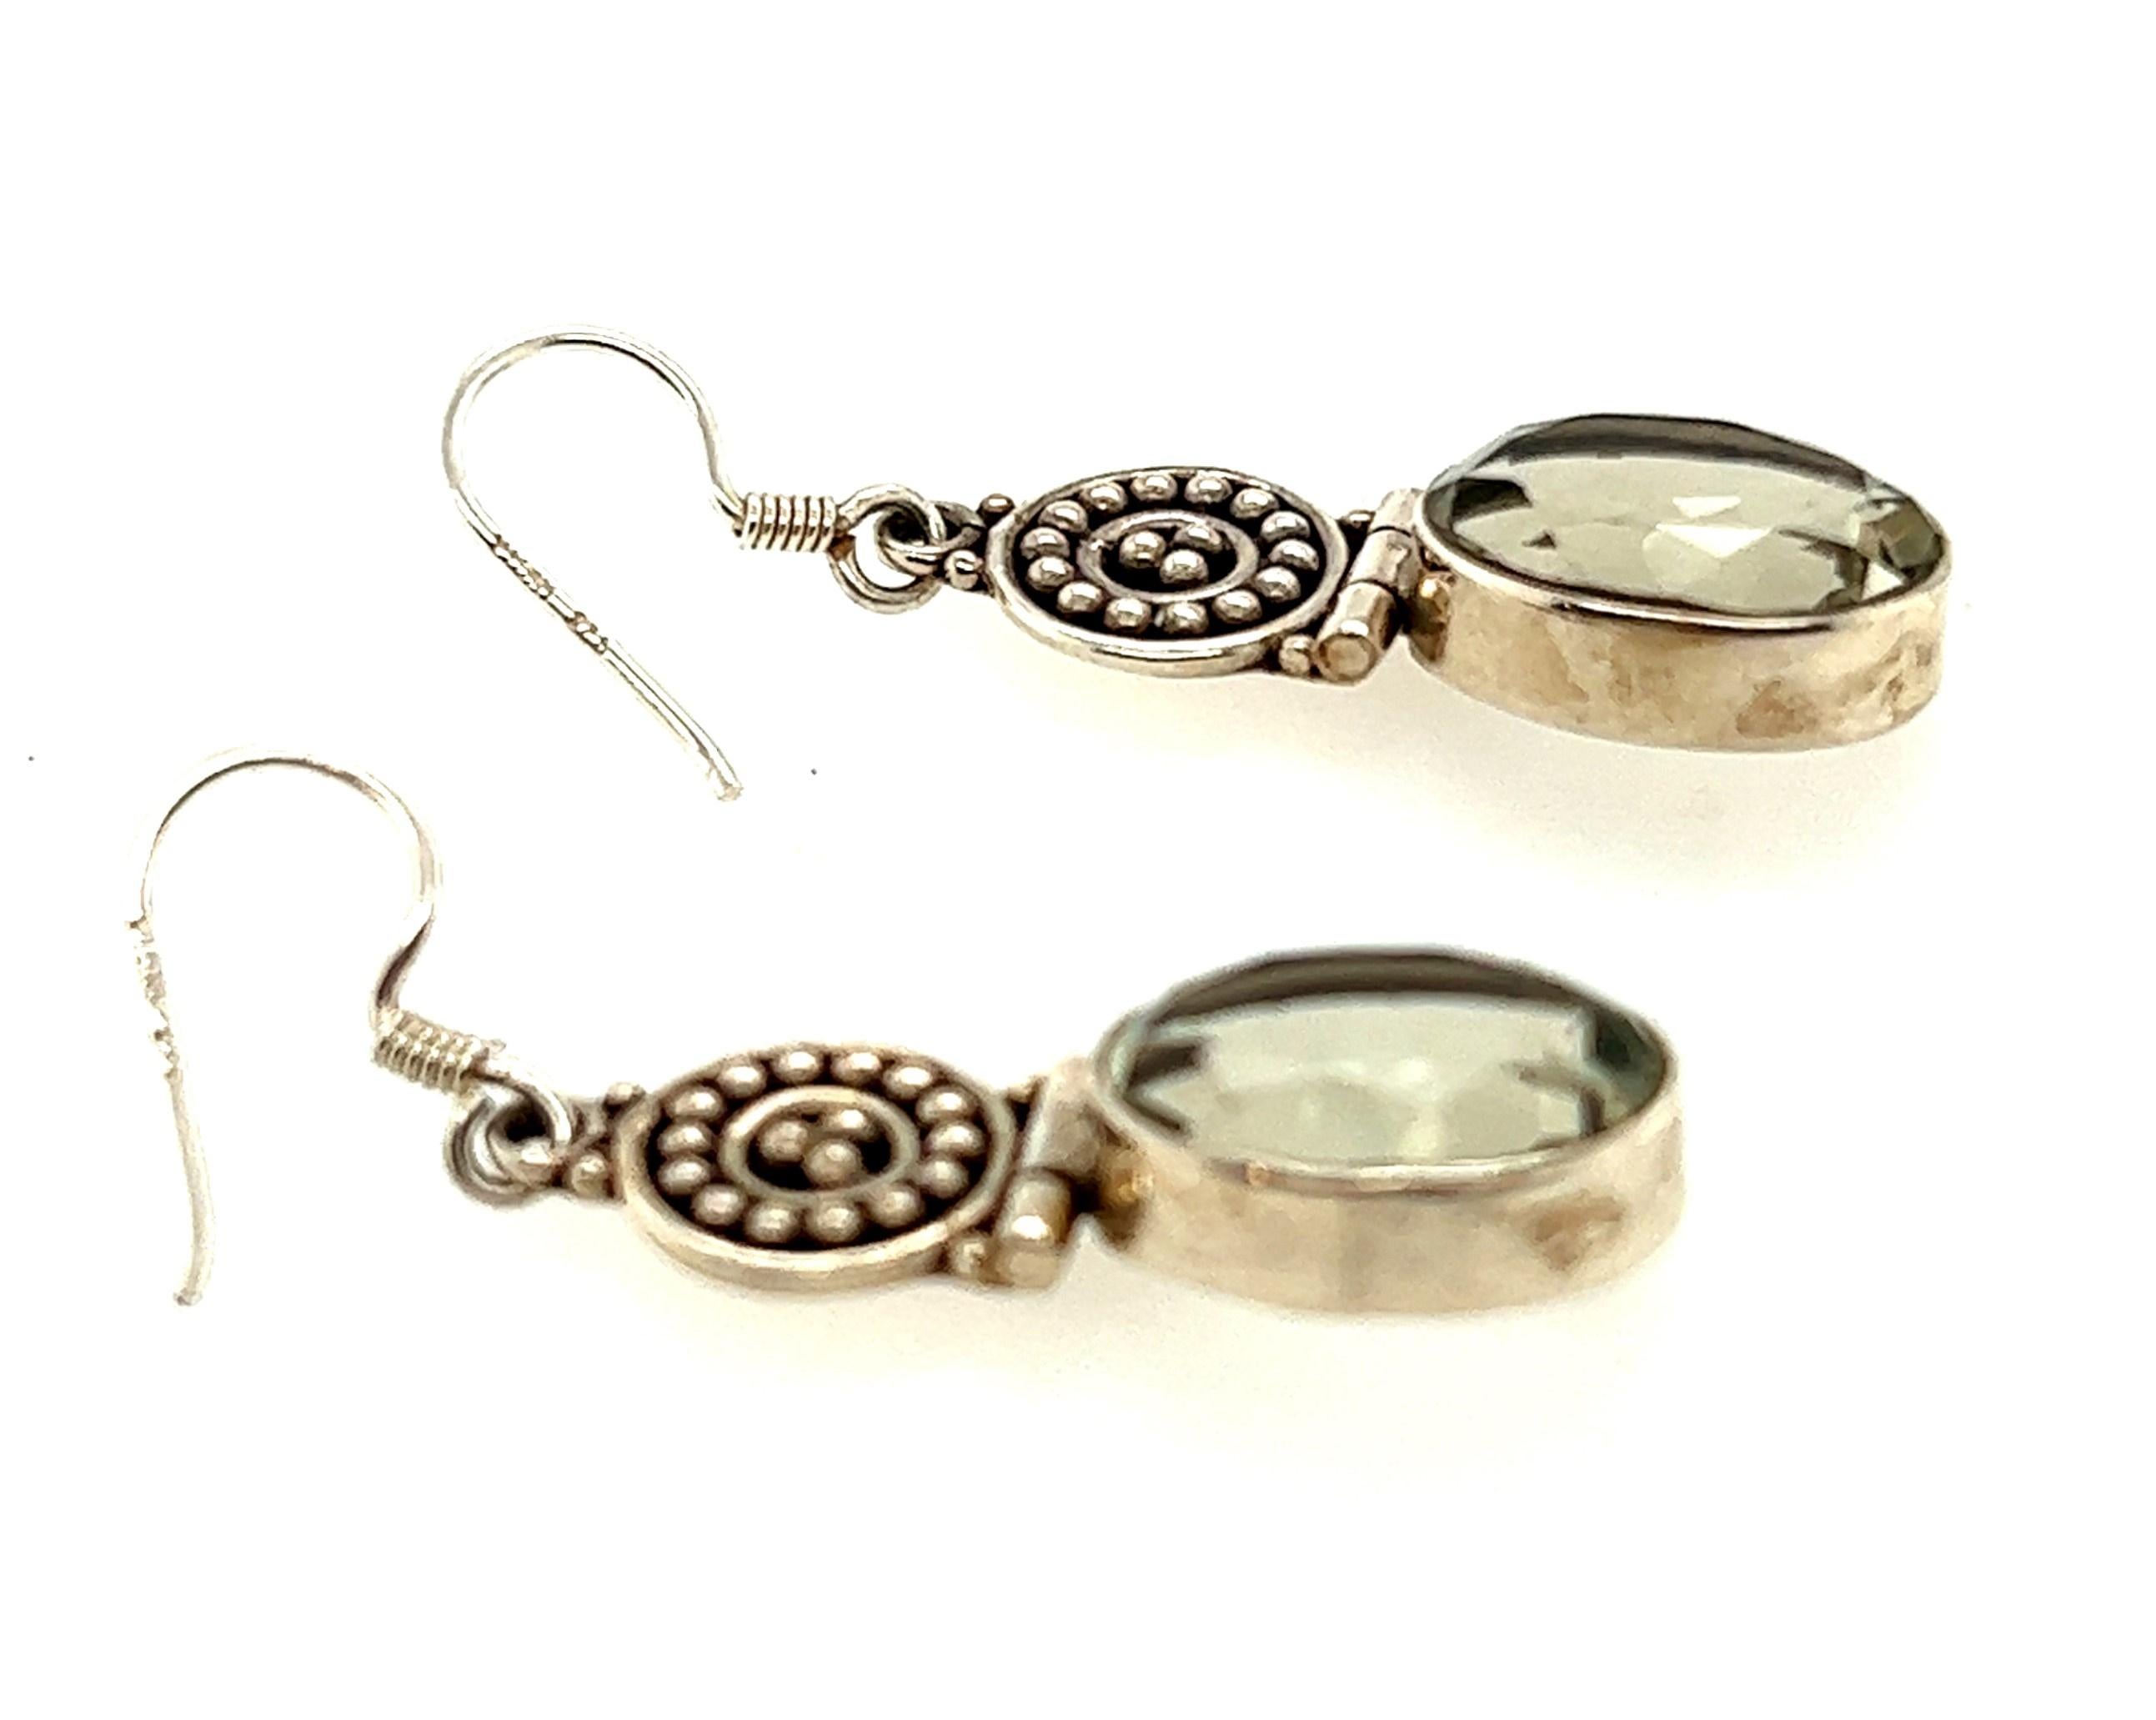 If you want to make a statement, these earrings will do the trick!

These earrings have a granulated disk at the top with a bezel set drop suspended from them at the bottom of the earrings. The drops contain oval cut prasiolites weighing